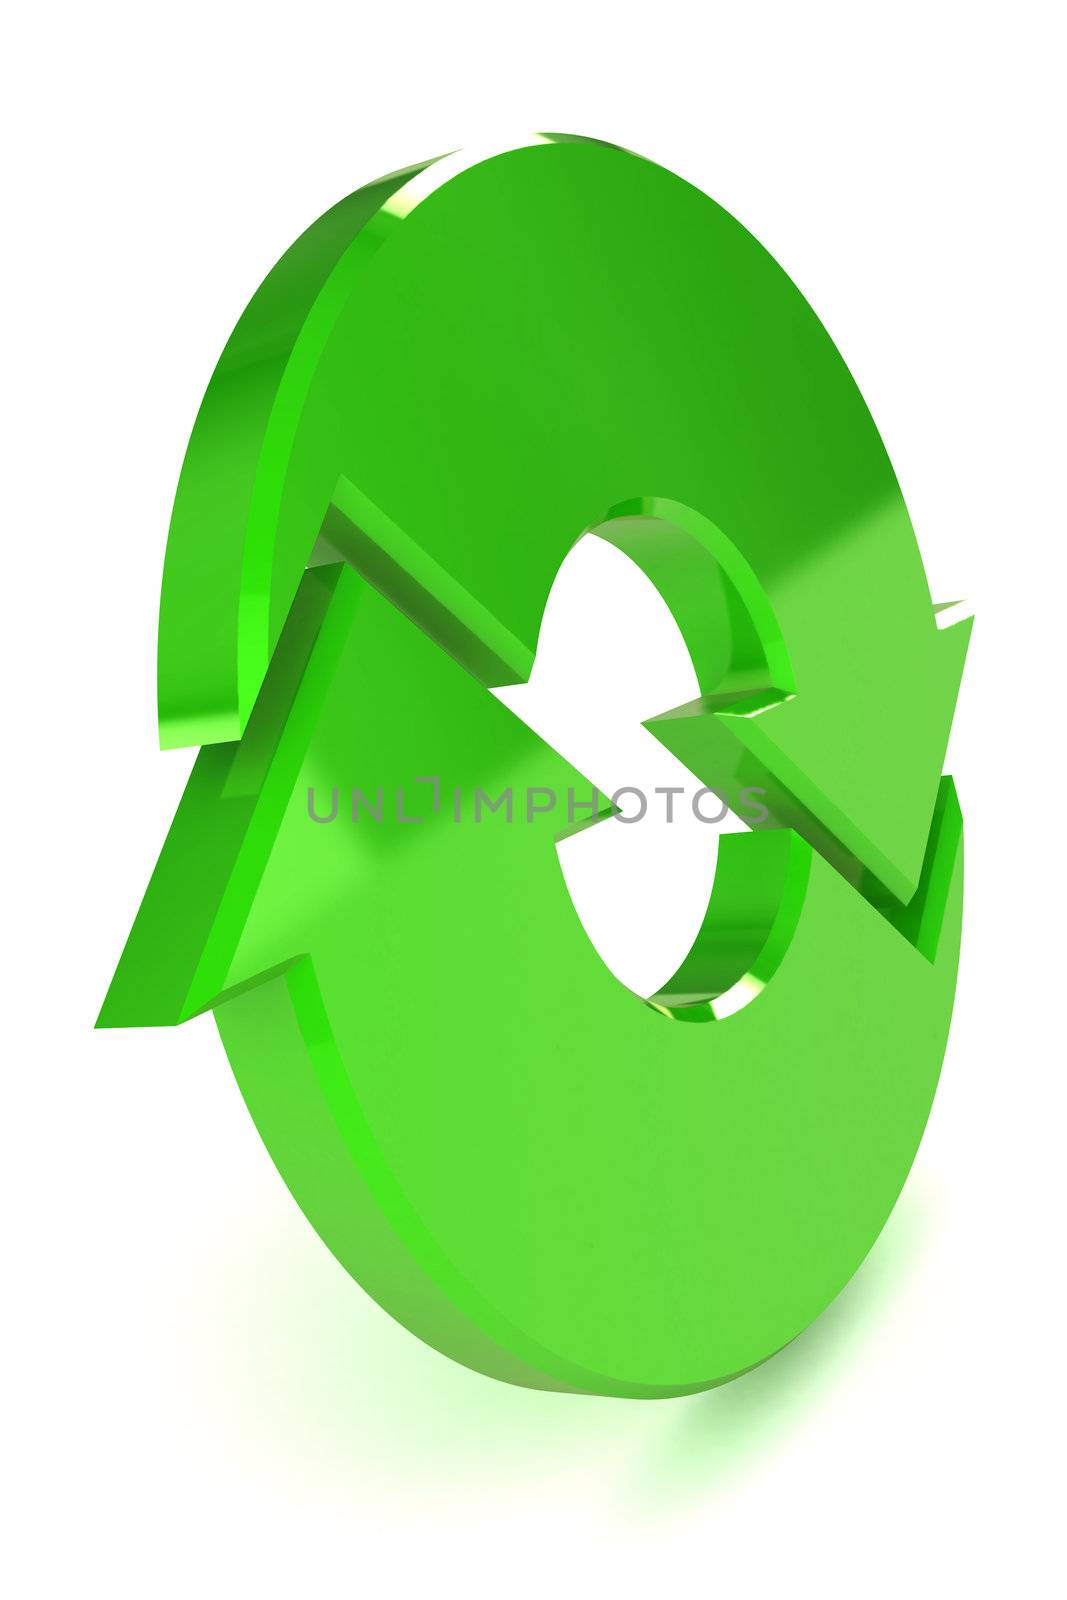 A Colourful 3d Rendered Green Process Arrow